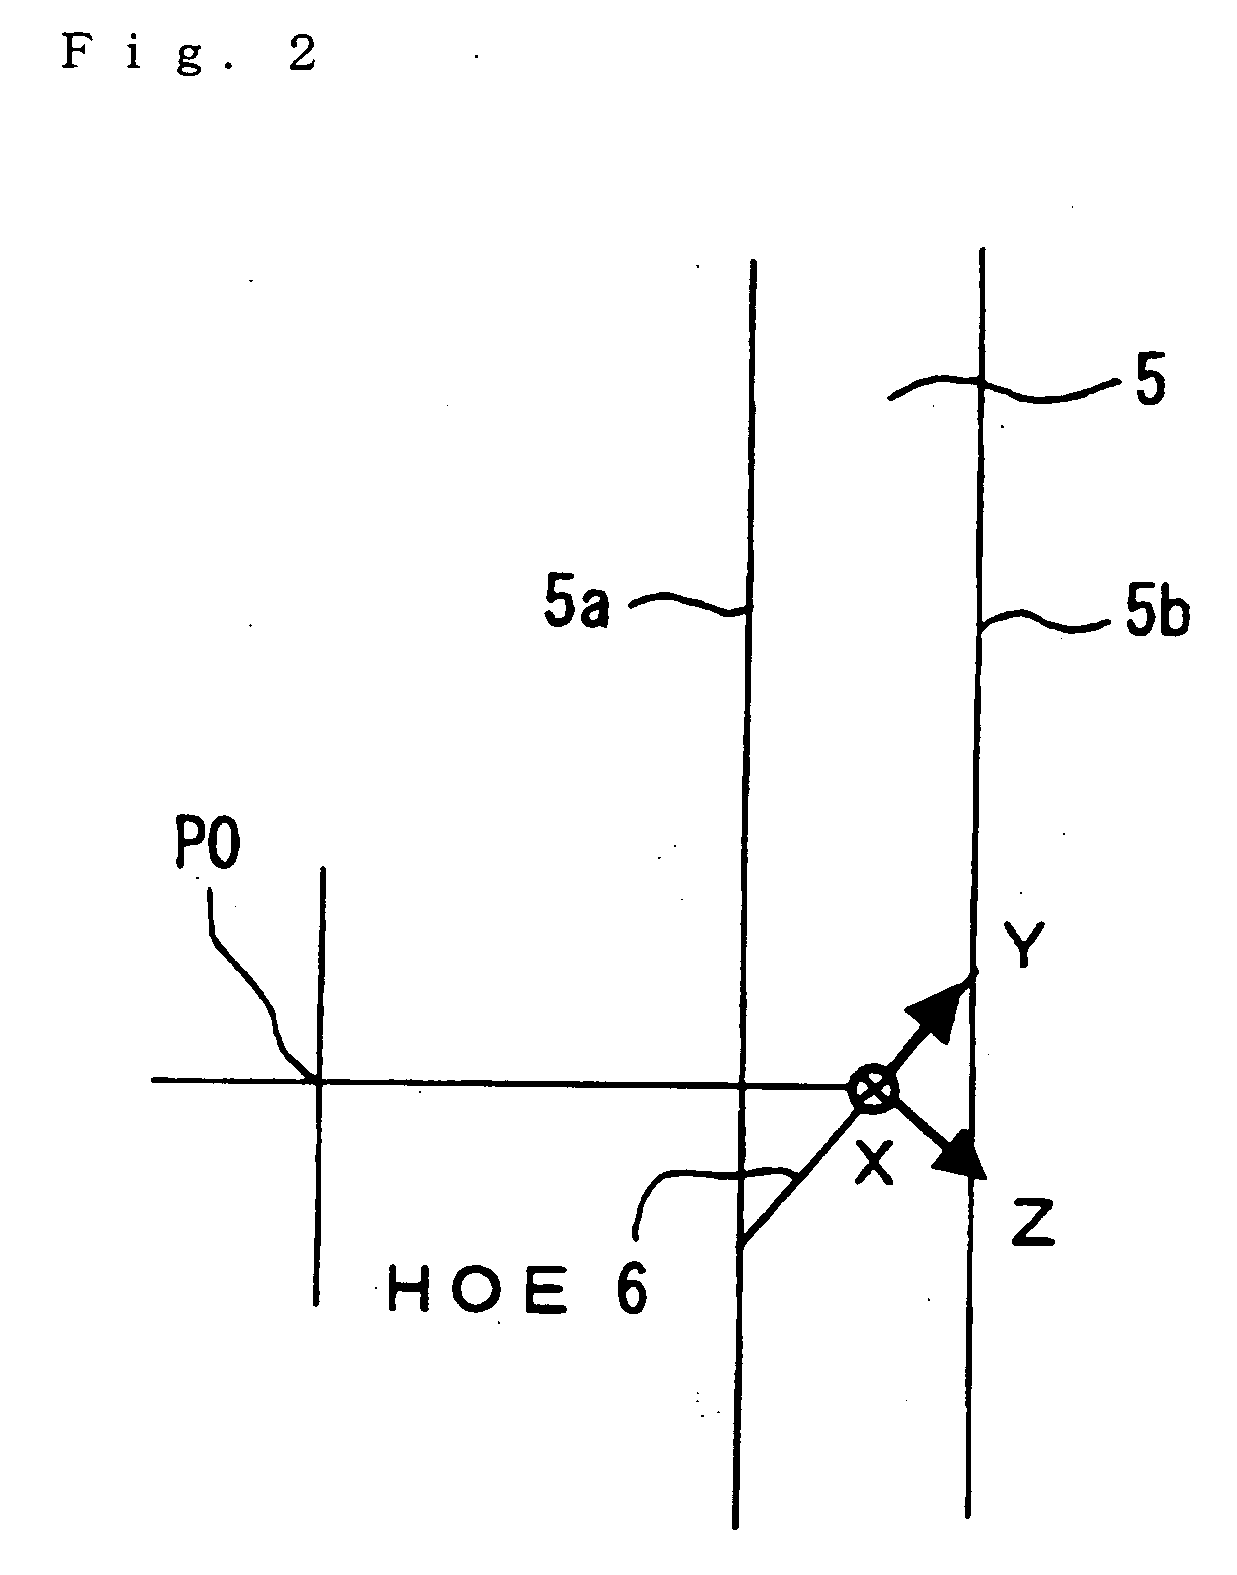 Image combiner and image display unit